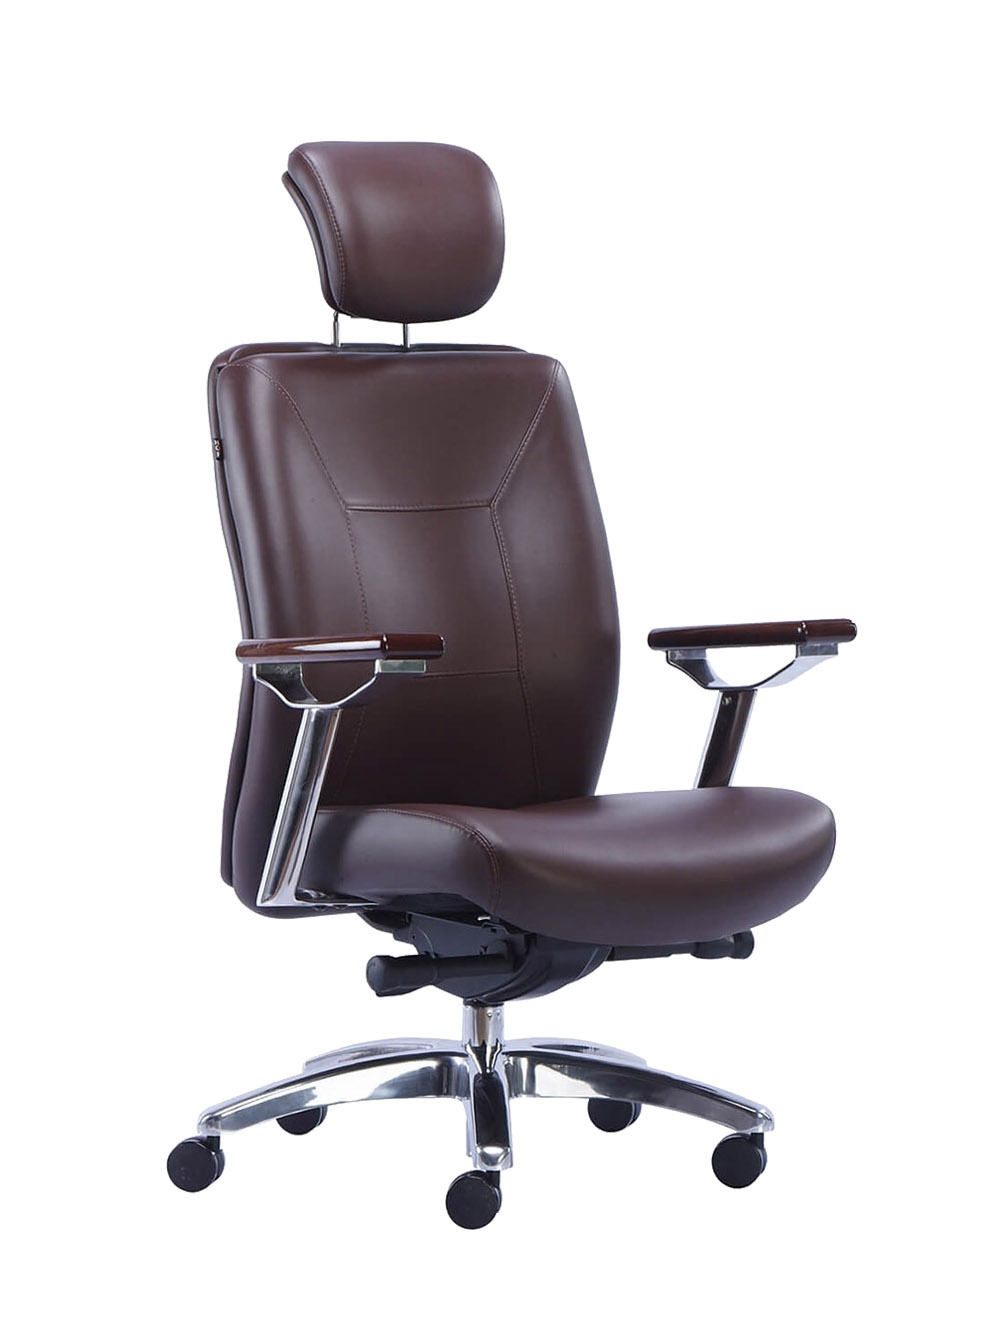 executive office chairs